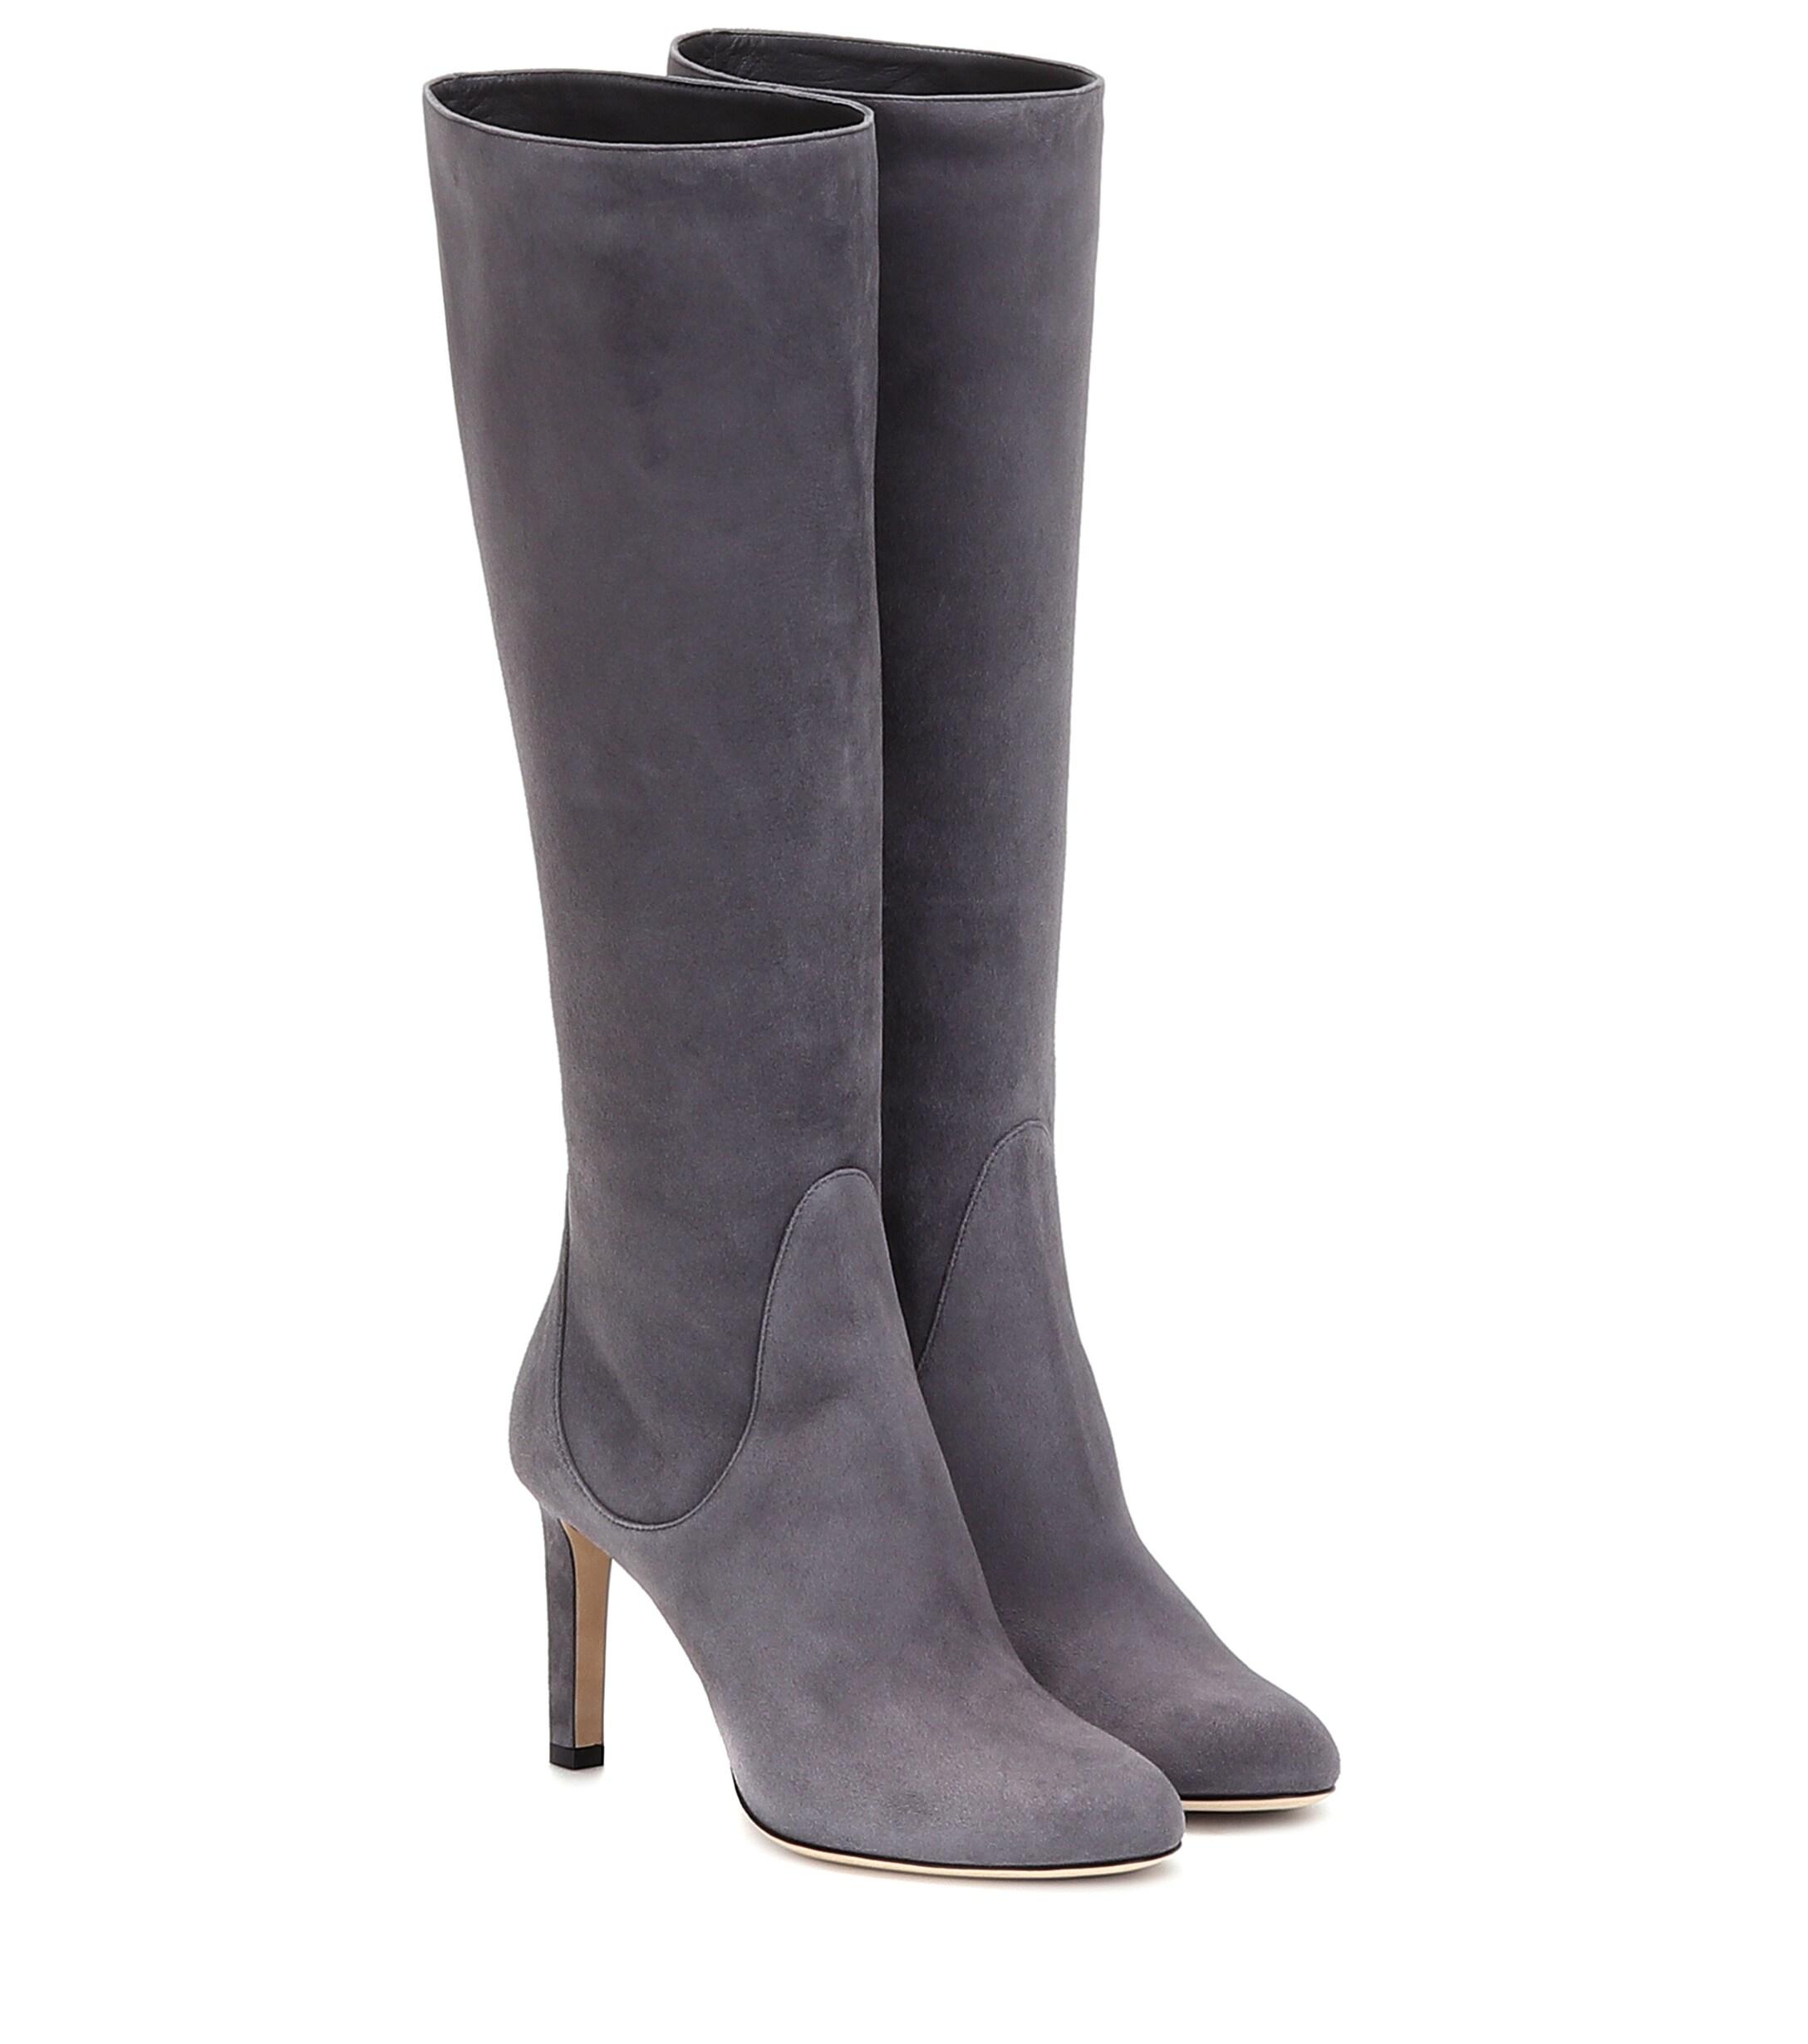 Jimmy Choo Tempe 85 Suede Knee-high Boots in Grey (Gray) - Lyst